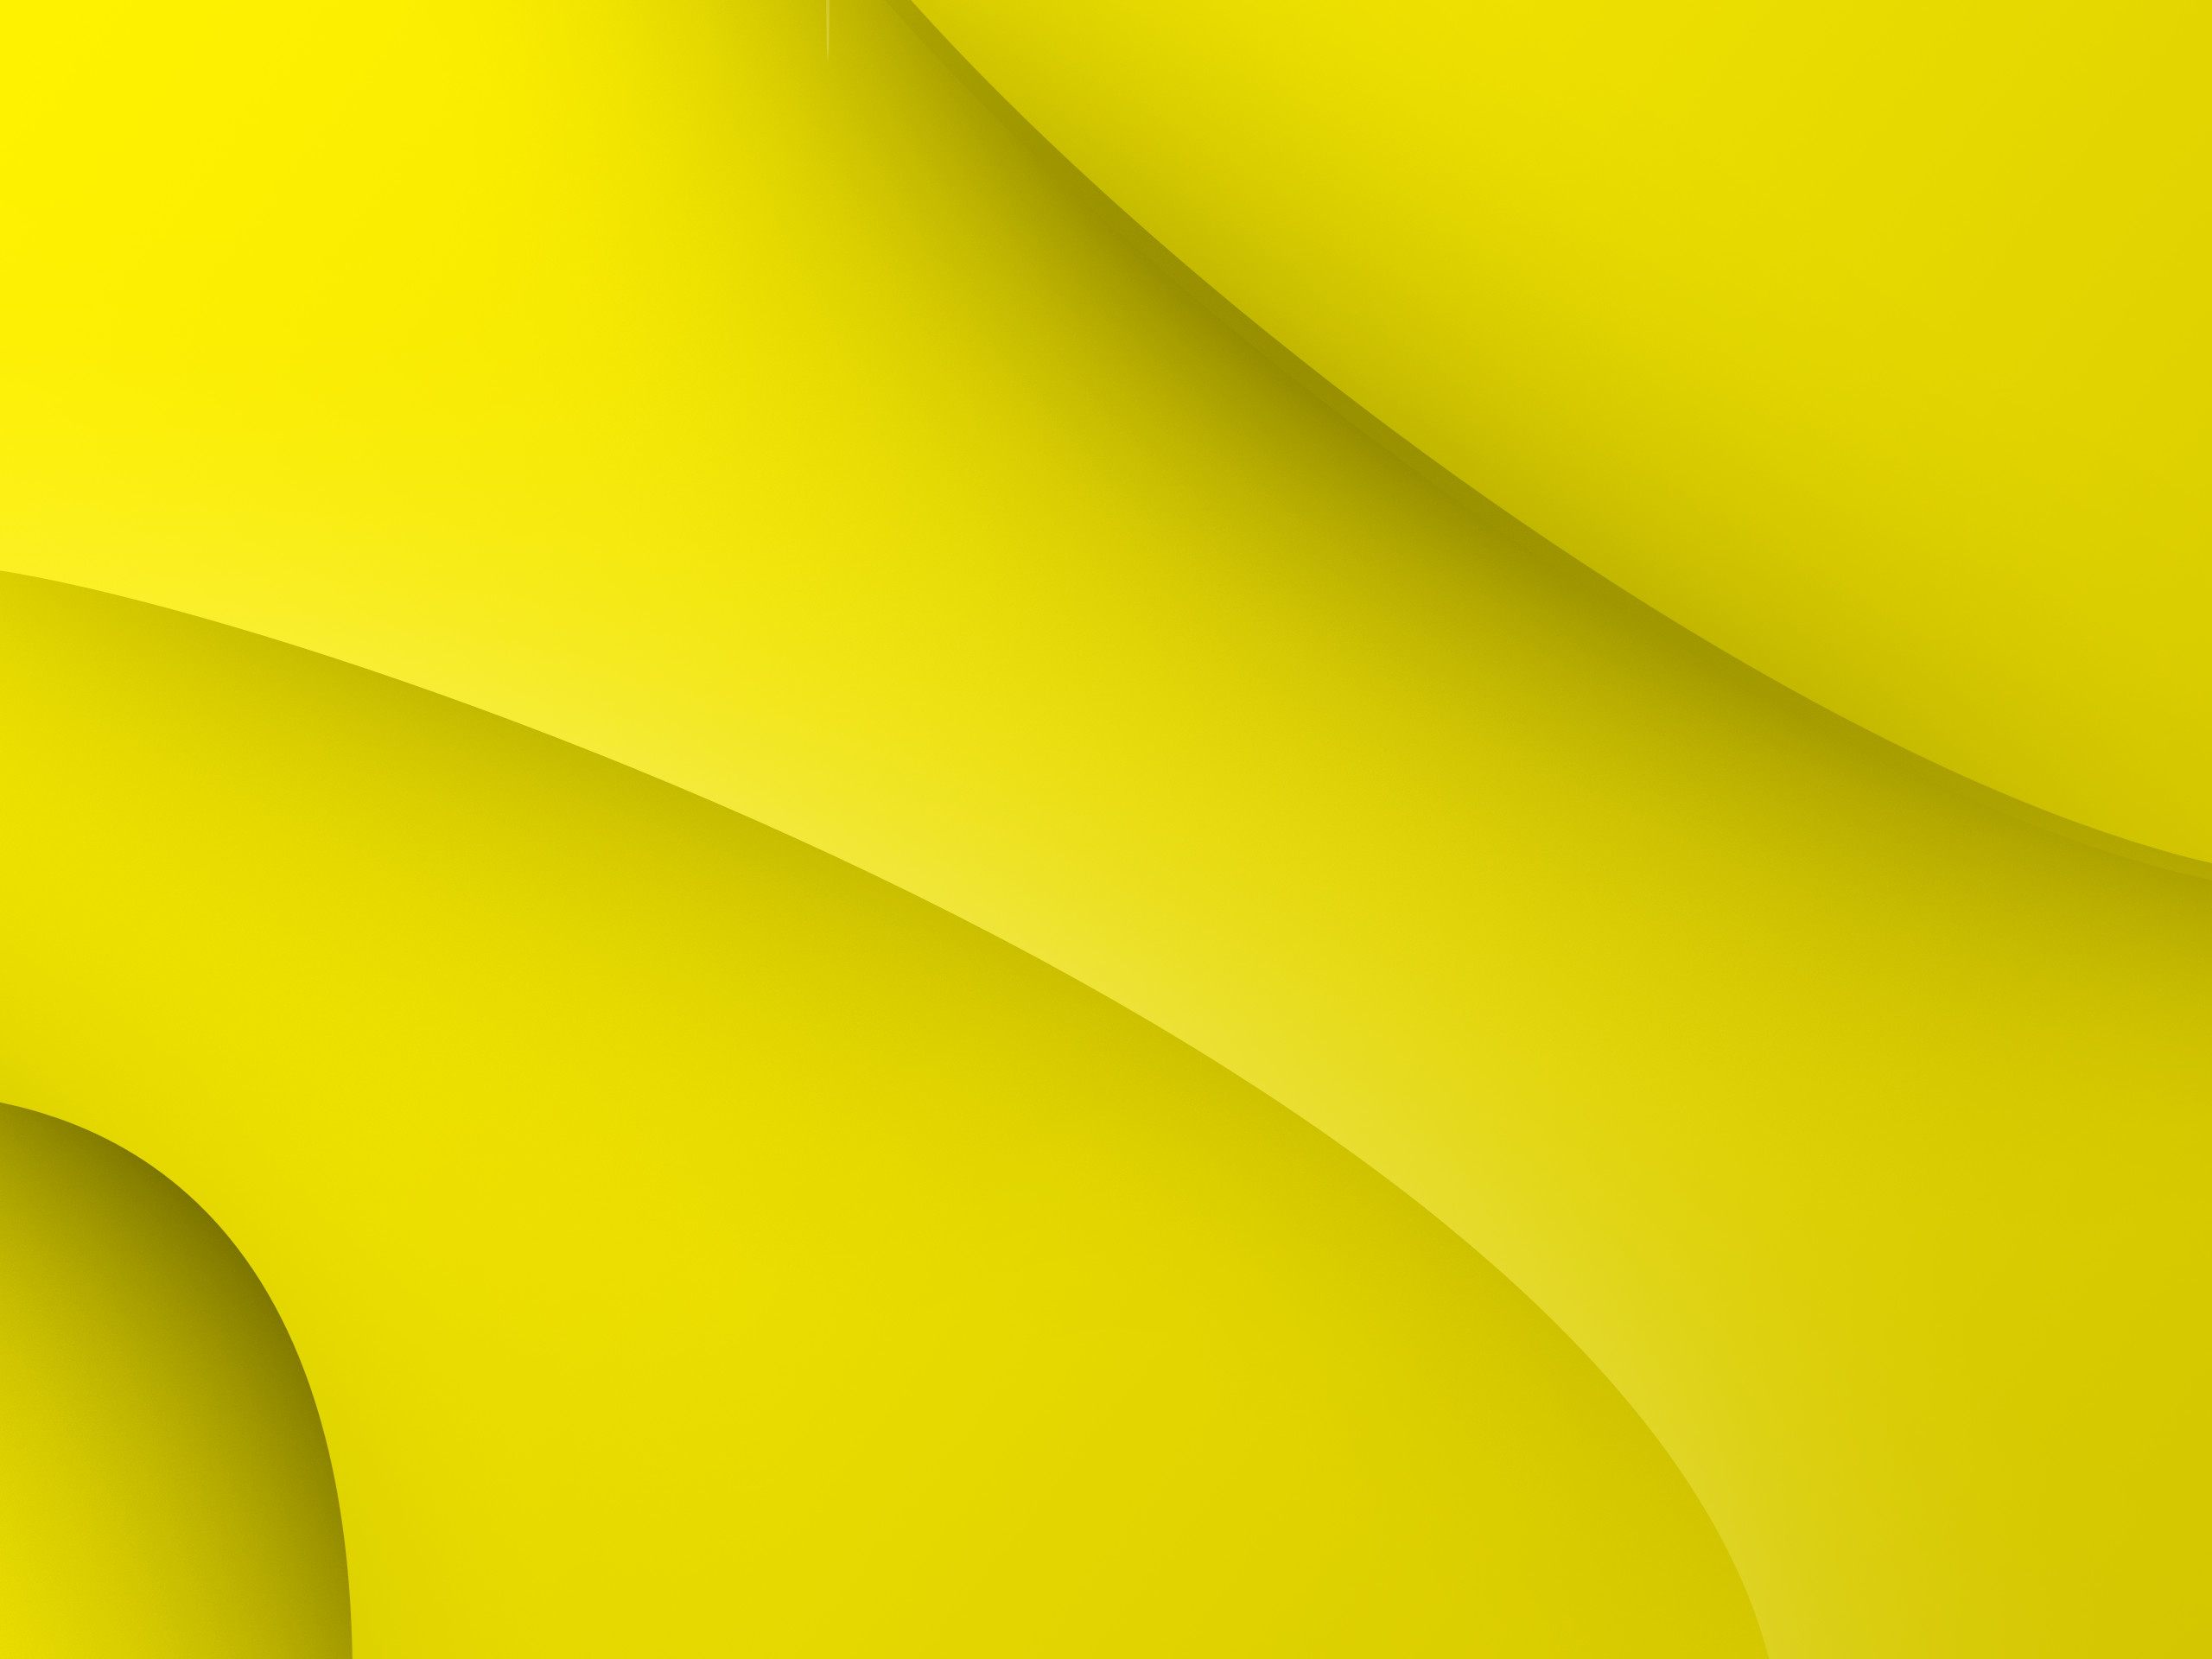 2560x1920, Solid Yellow Wallpaper Images Data Id - Yellow Line Football  Background - 2560x1920 Wallpaper 